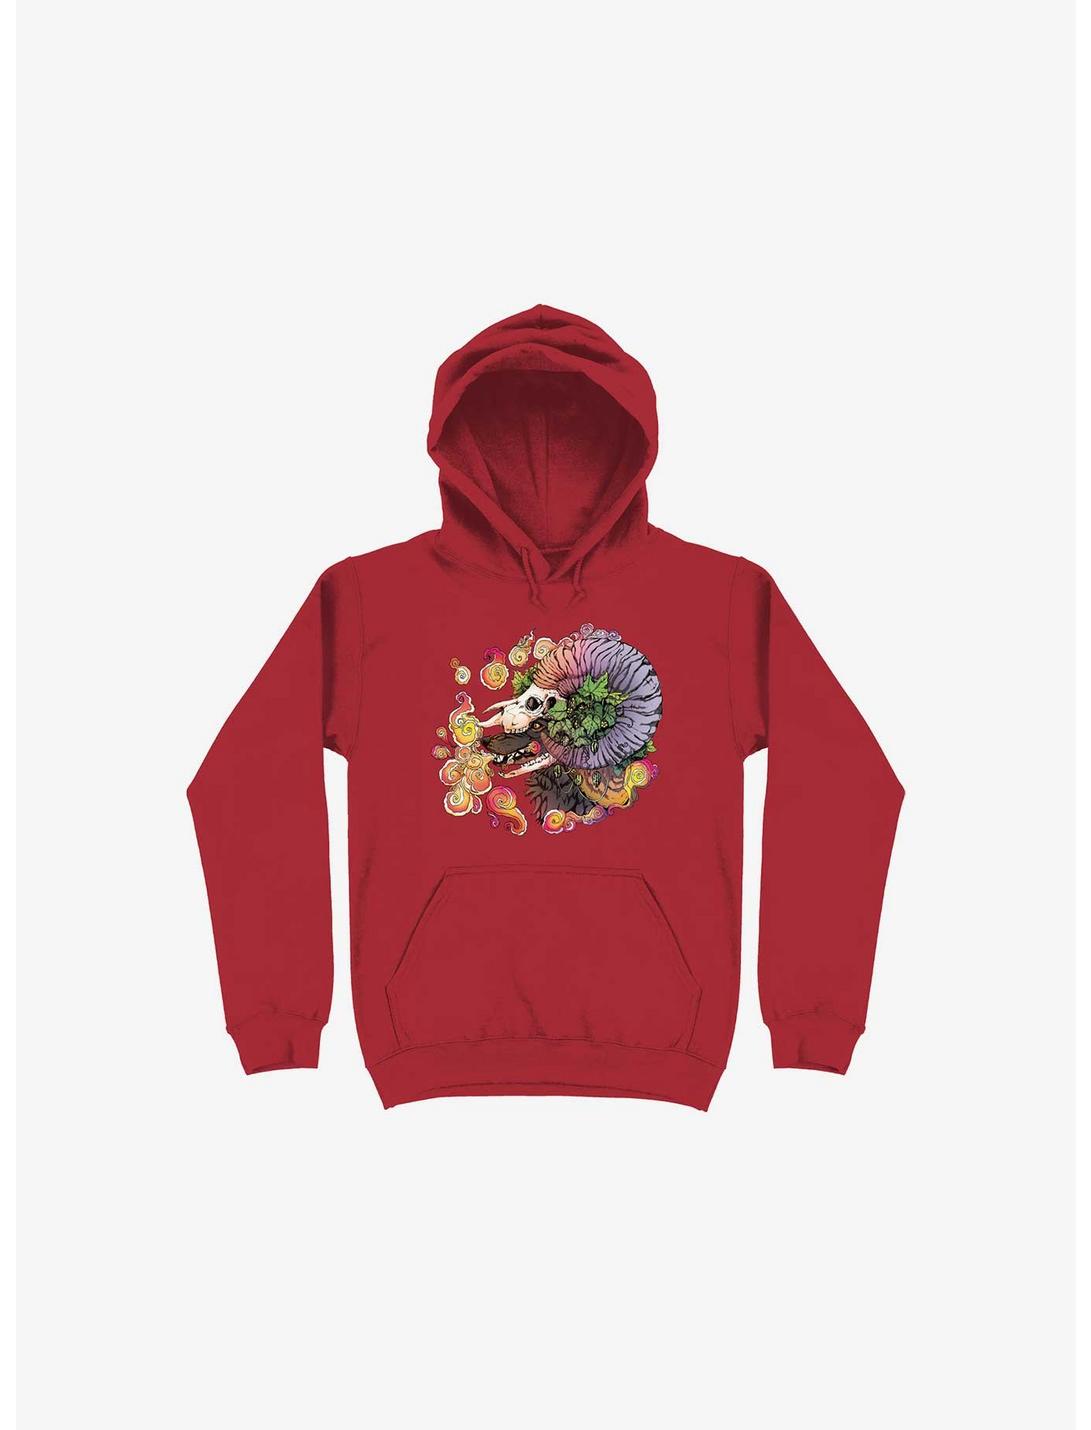 What Doesn't Kill You Becomes Your Armor Wolf And Sheep Red Hoodie, RED, hi-res